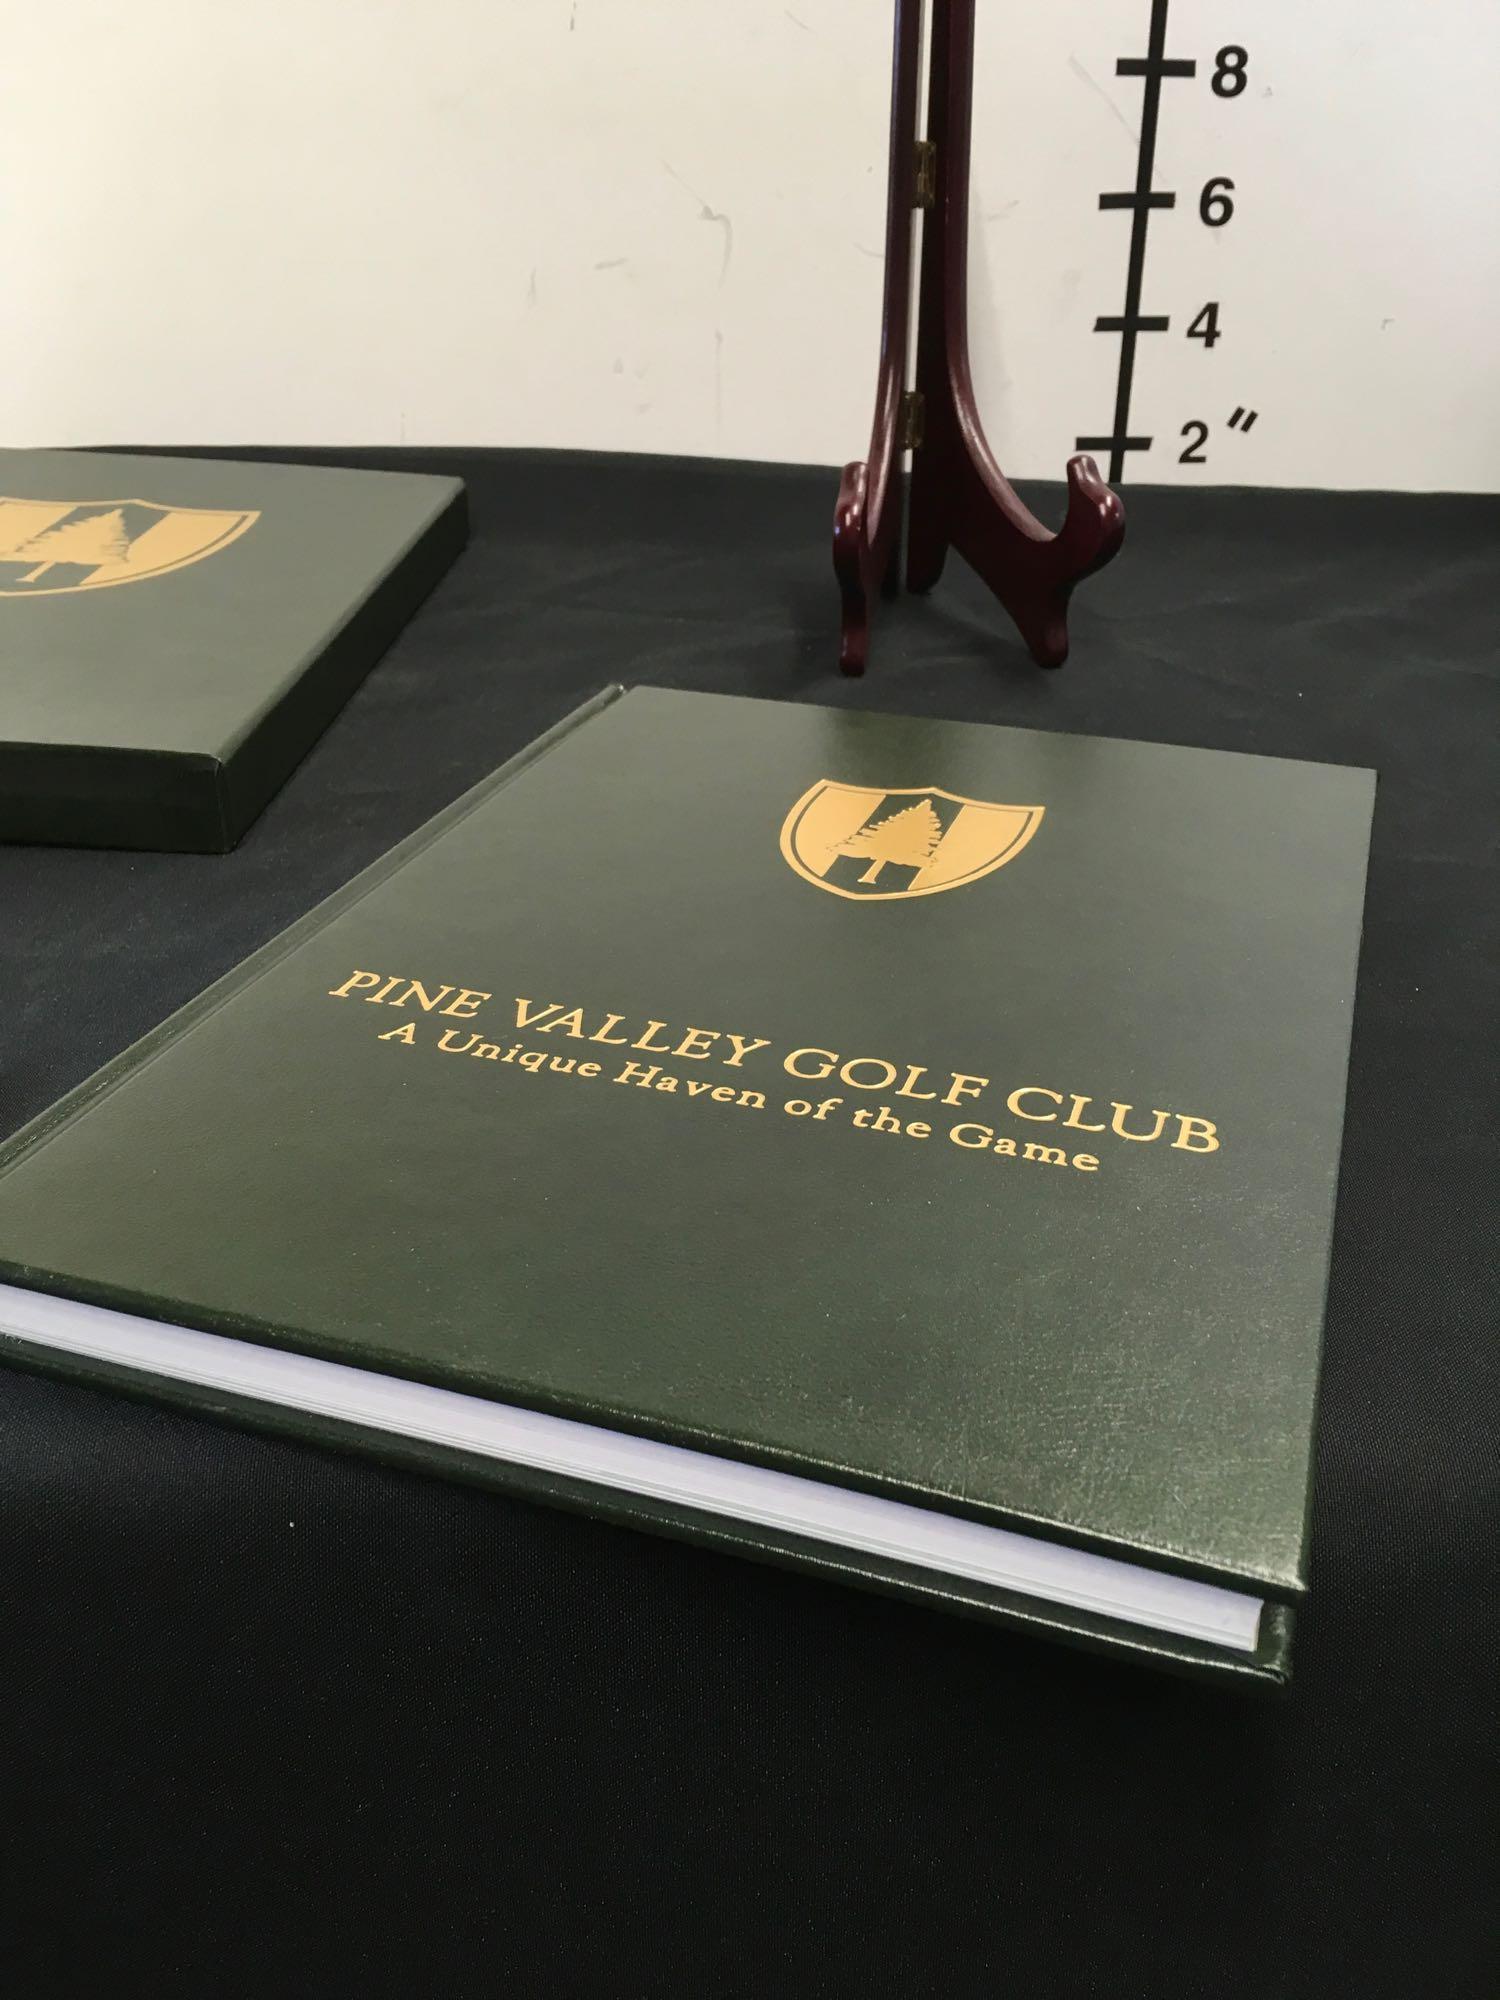 Pine Valley Golf Club A Unique Haven of The Game. Signed by Jim Finegan. Book with bookcase